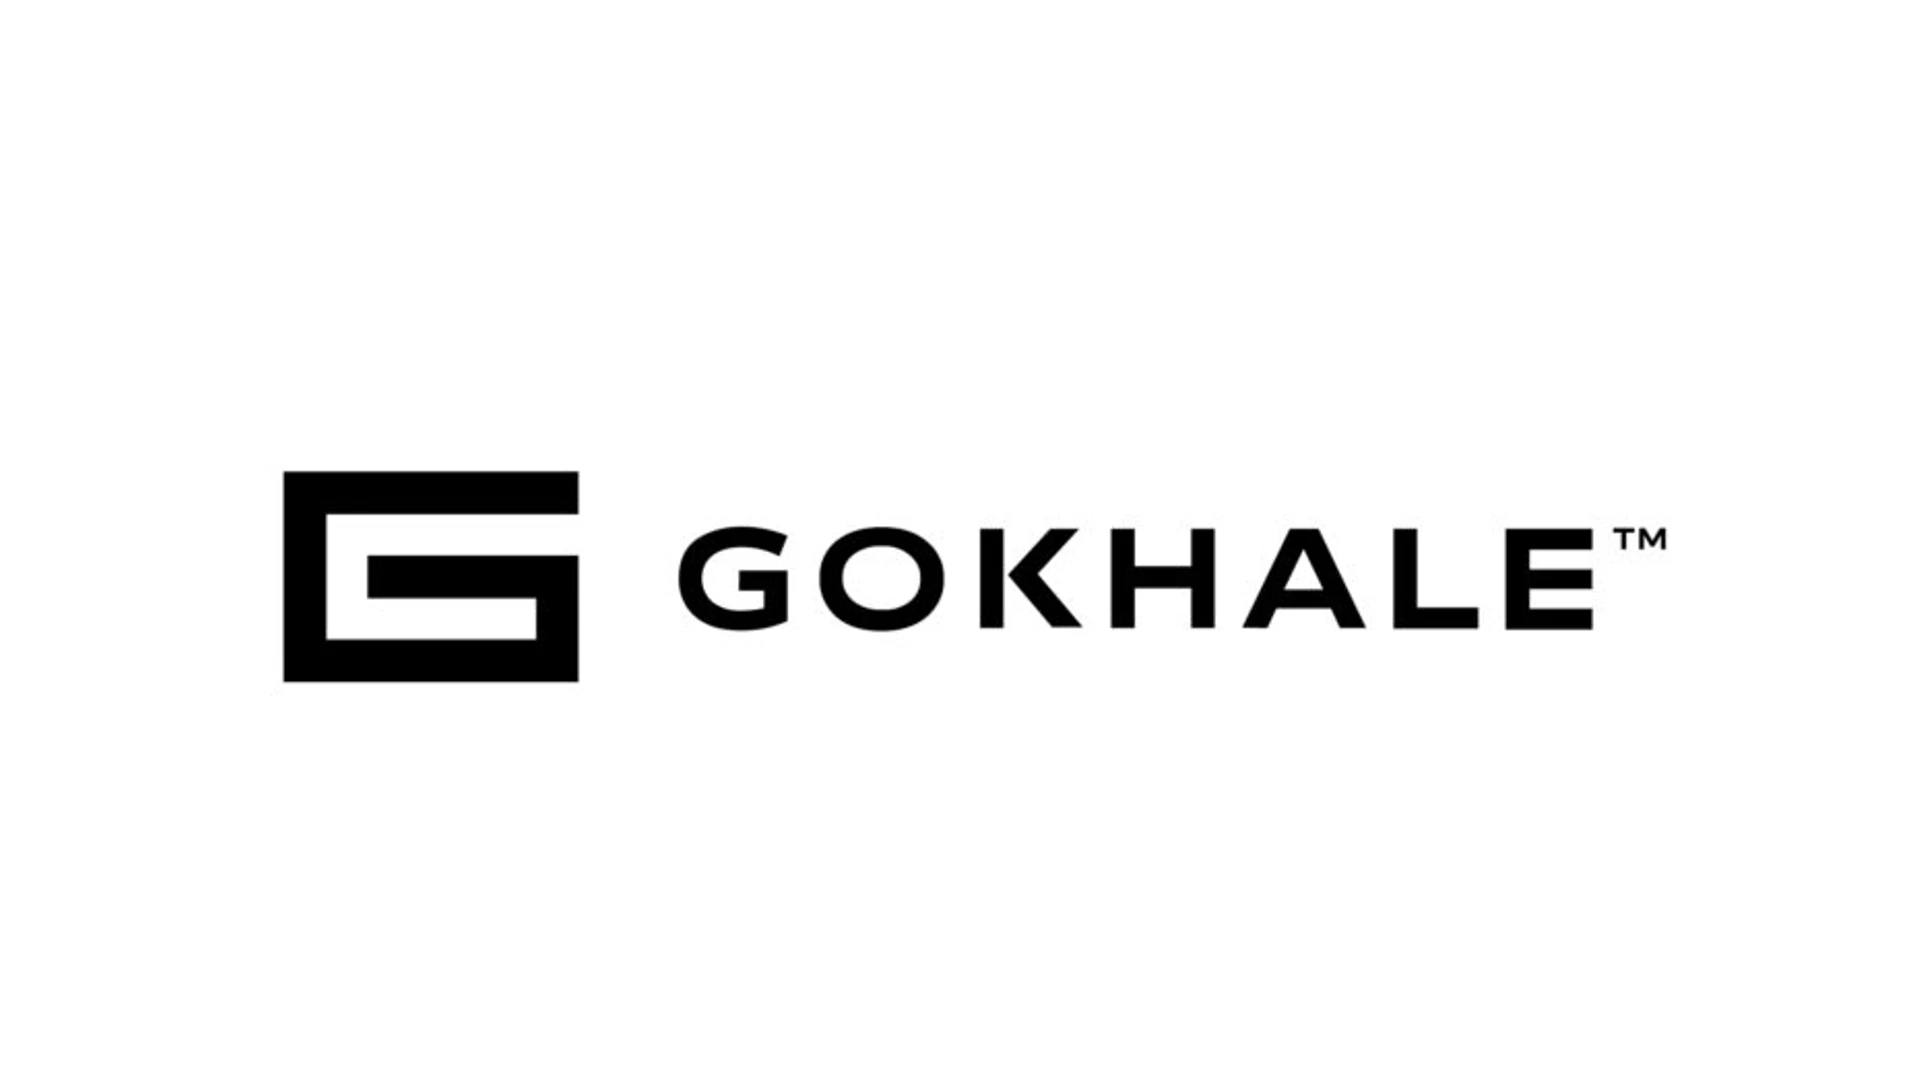 Gokhale Constructions in expansion strategy, Unveils its new identity.